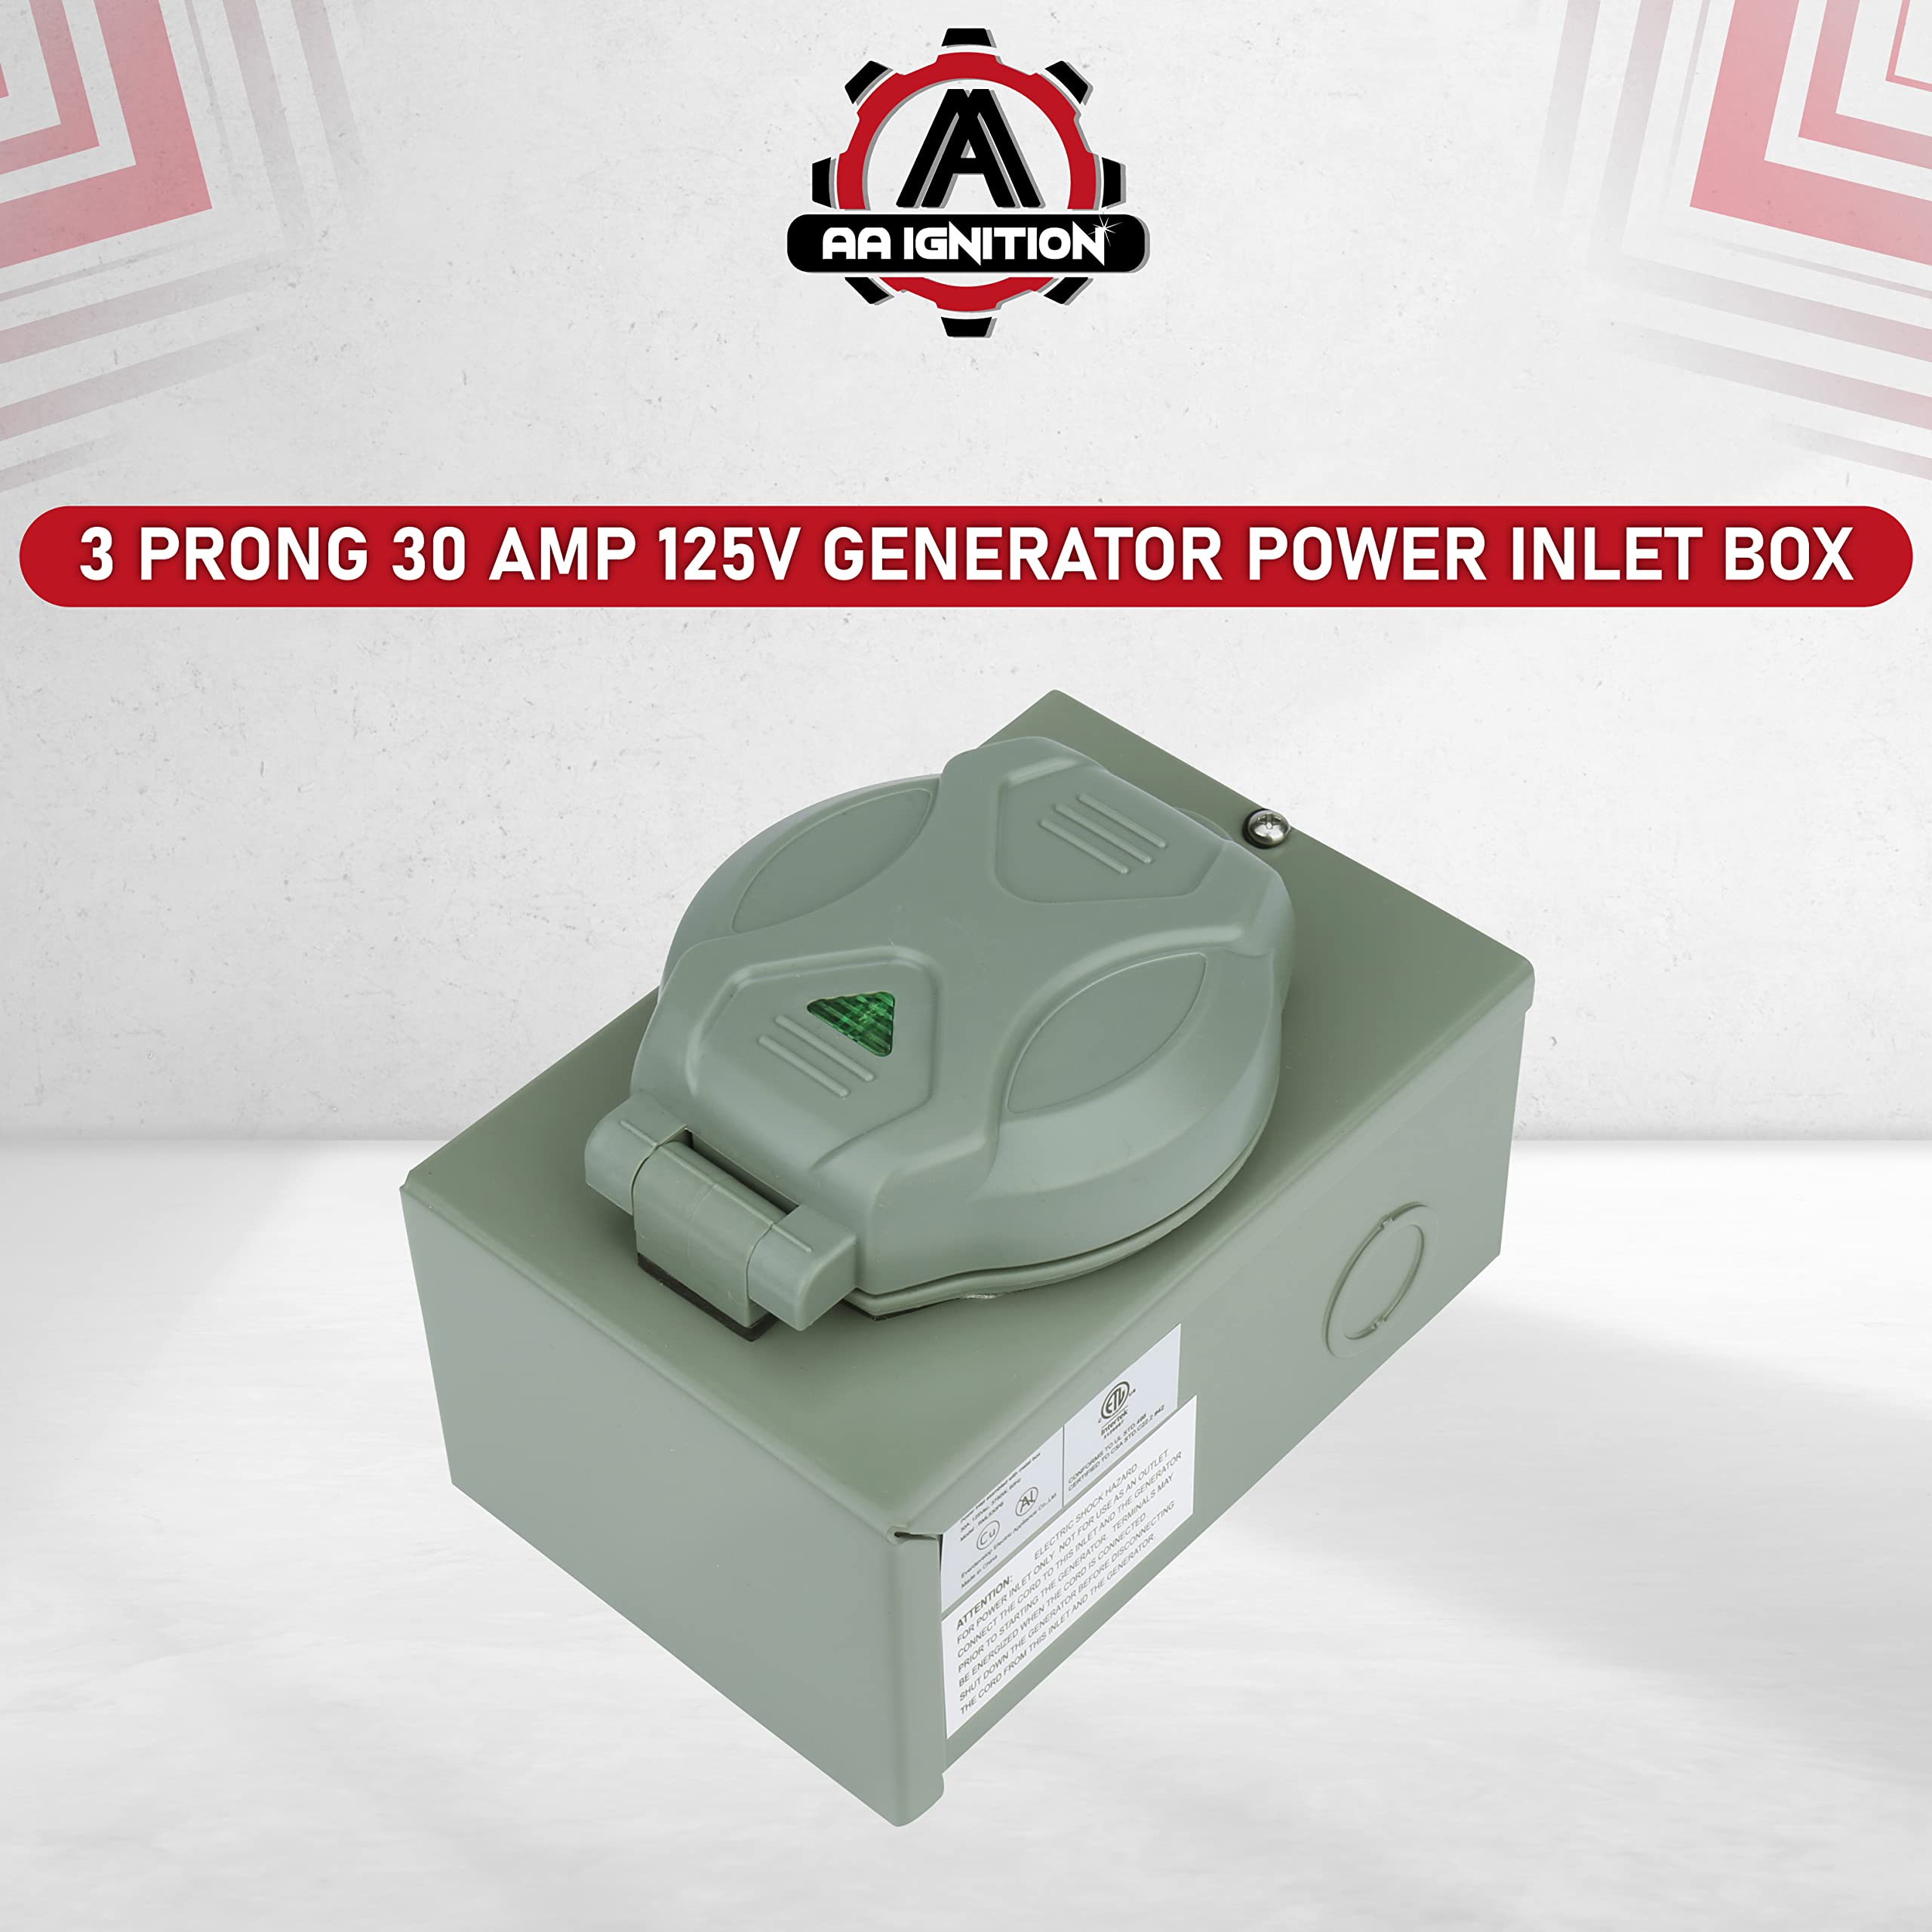 AA Ignition 3 Prong 30 Amp 125/250V Generator Power Inlet Box - NEMA L5-30 Power Inlet Box - 3750 Watts Generator Inlet Plug for Outdoor Receptacle - Weatherproof Generator Outlet, ETL Listed  - Very Good